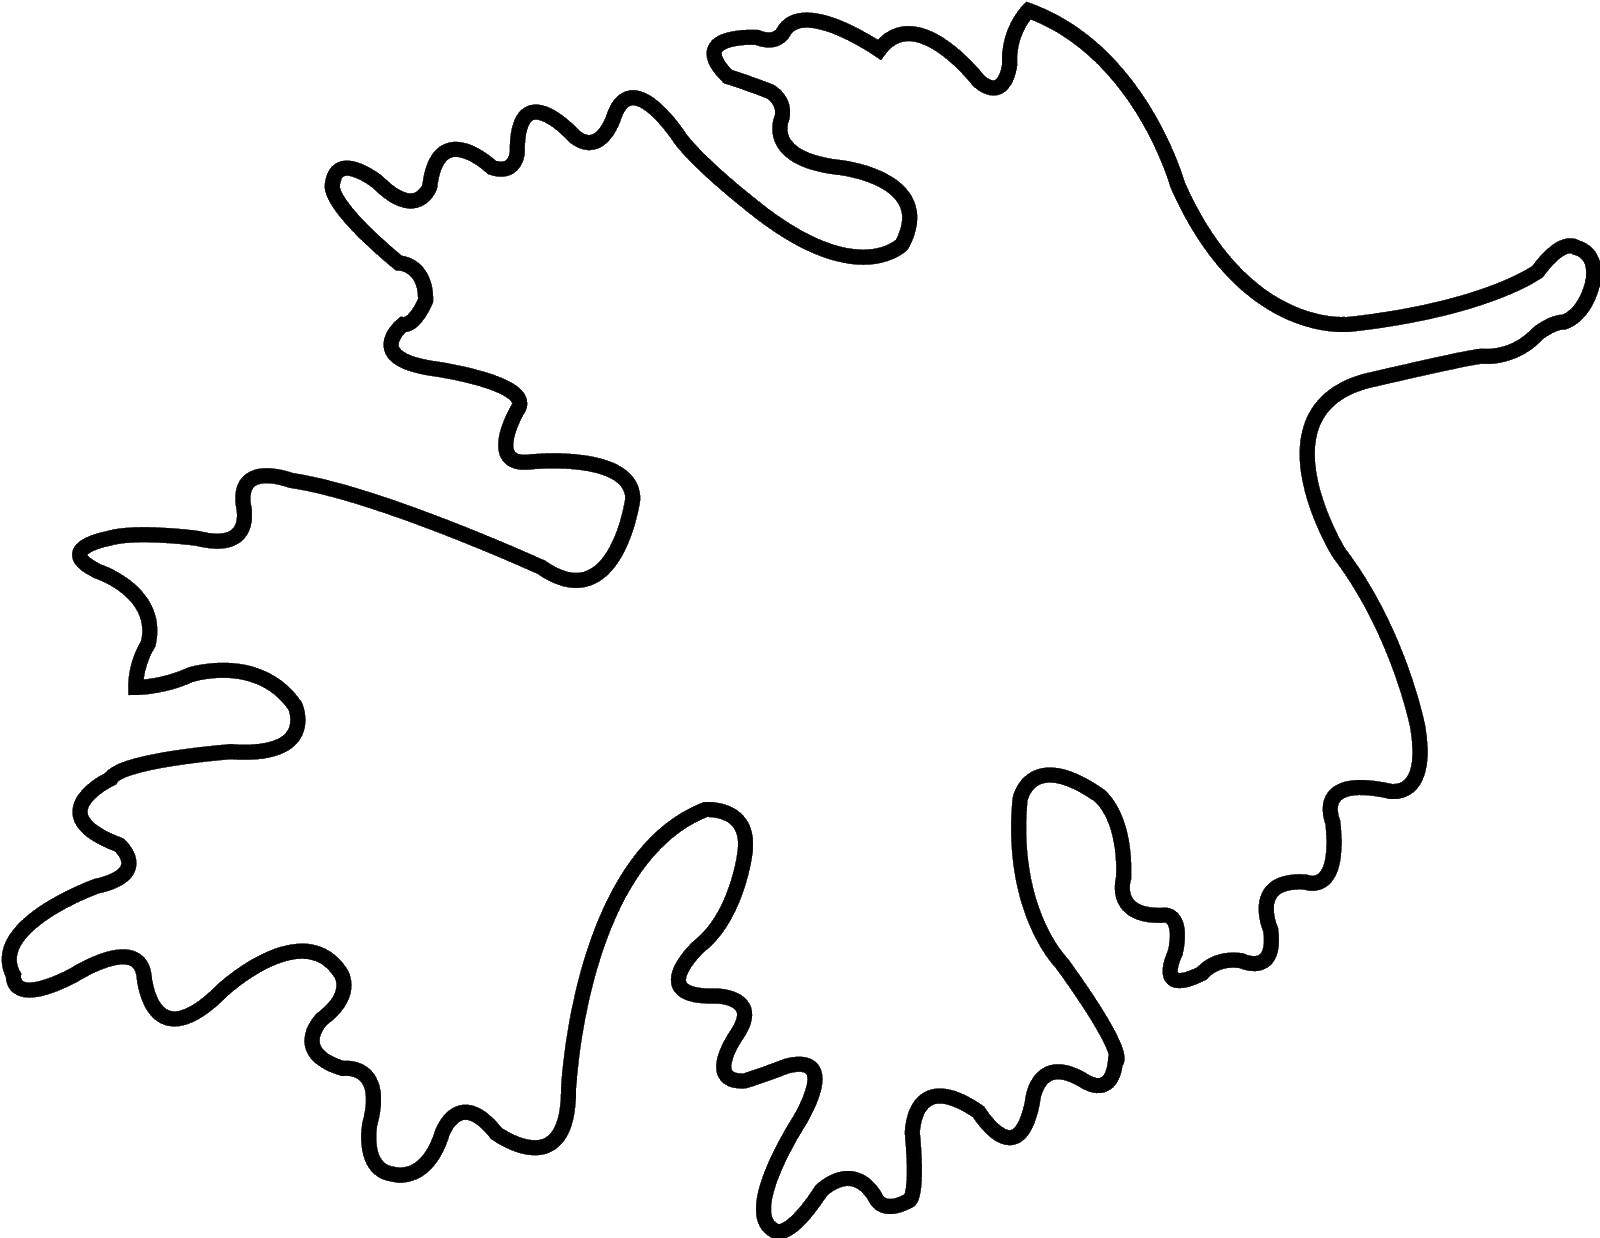 Coloring Leaf. Category The contours of the leaves of the trees. Tags:  the contours of the leaves, leaves.